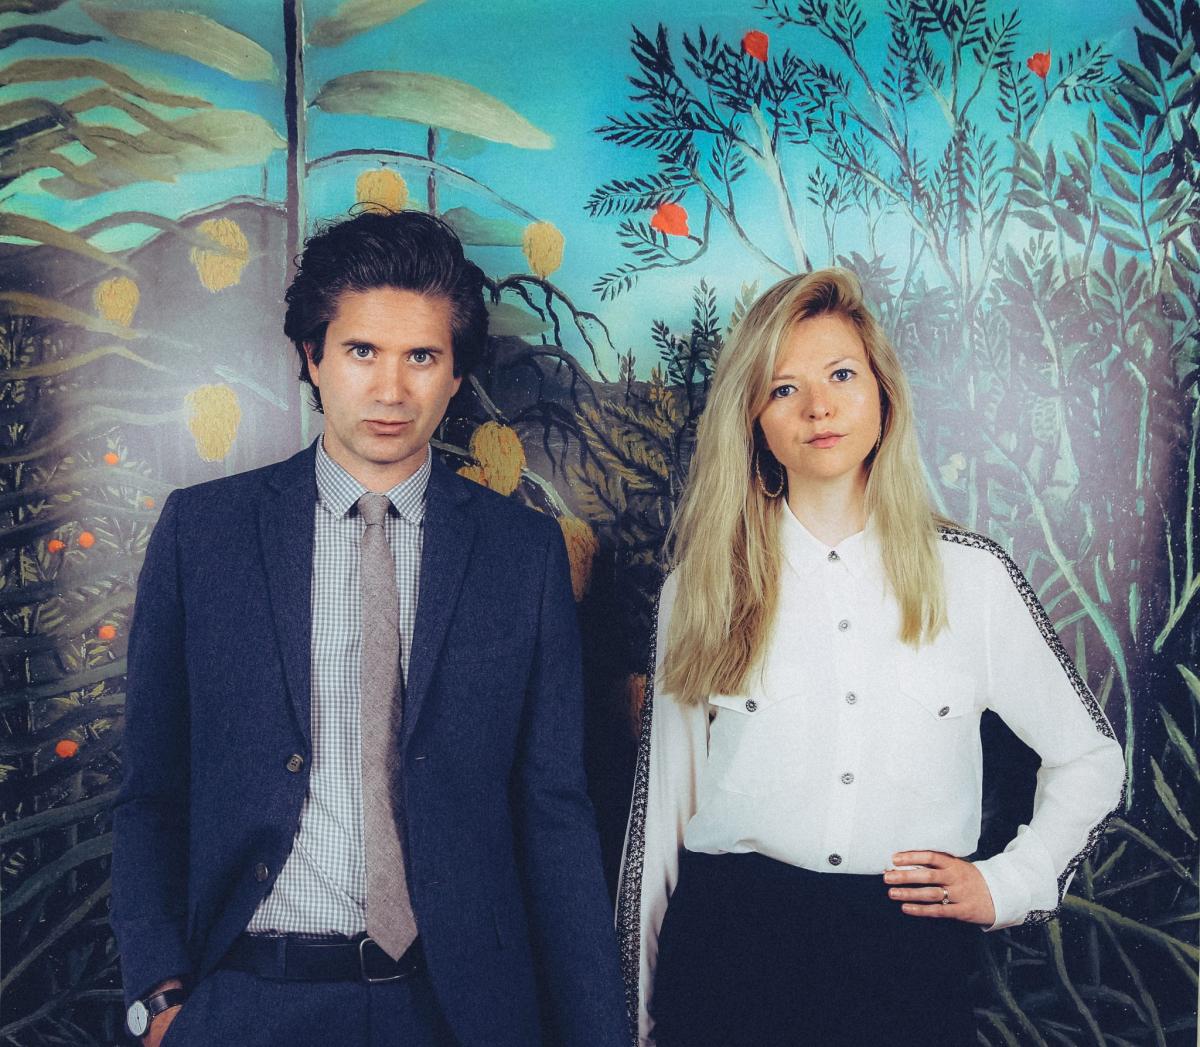 Still Corners bring their new album and tour to Oxford's O2